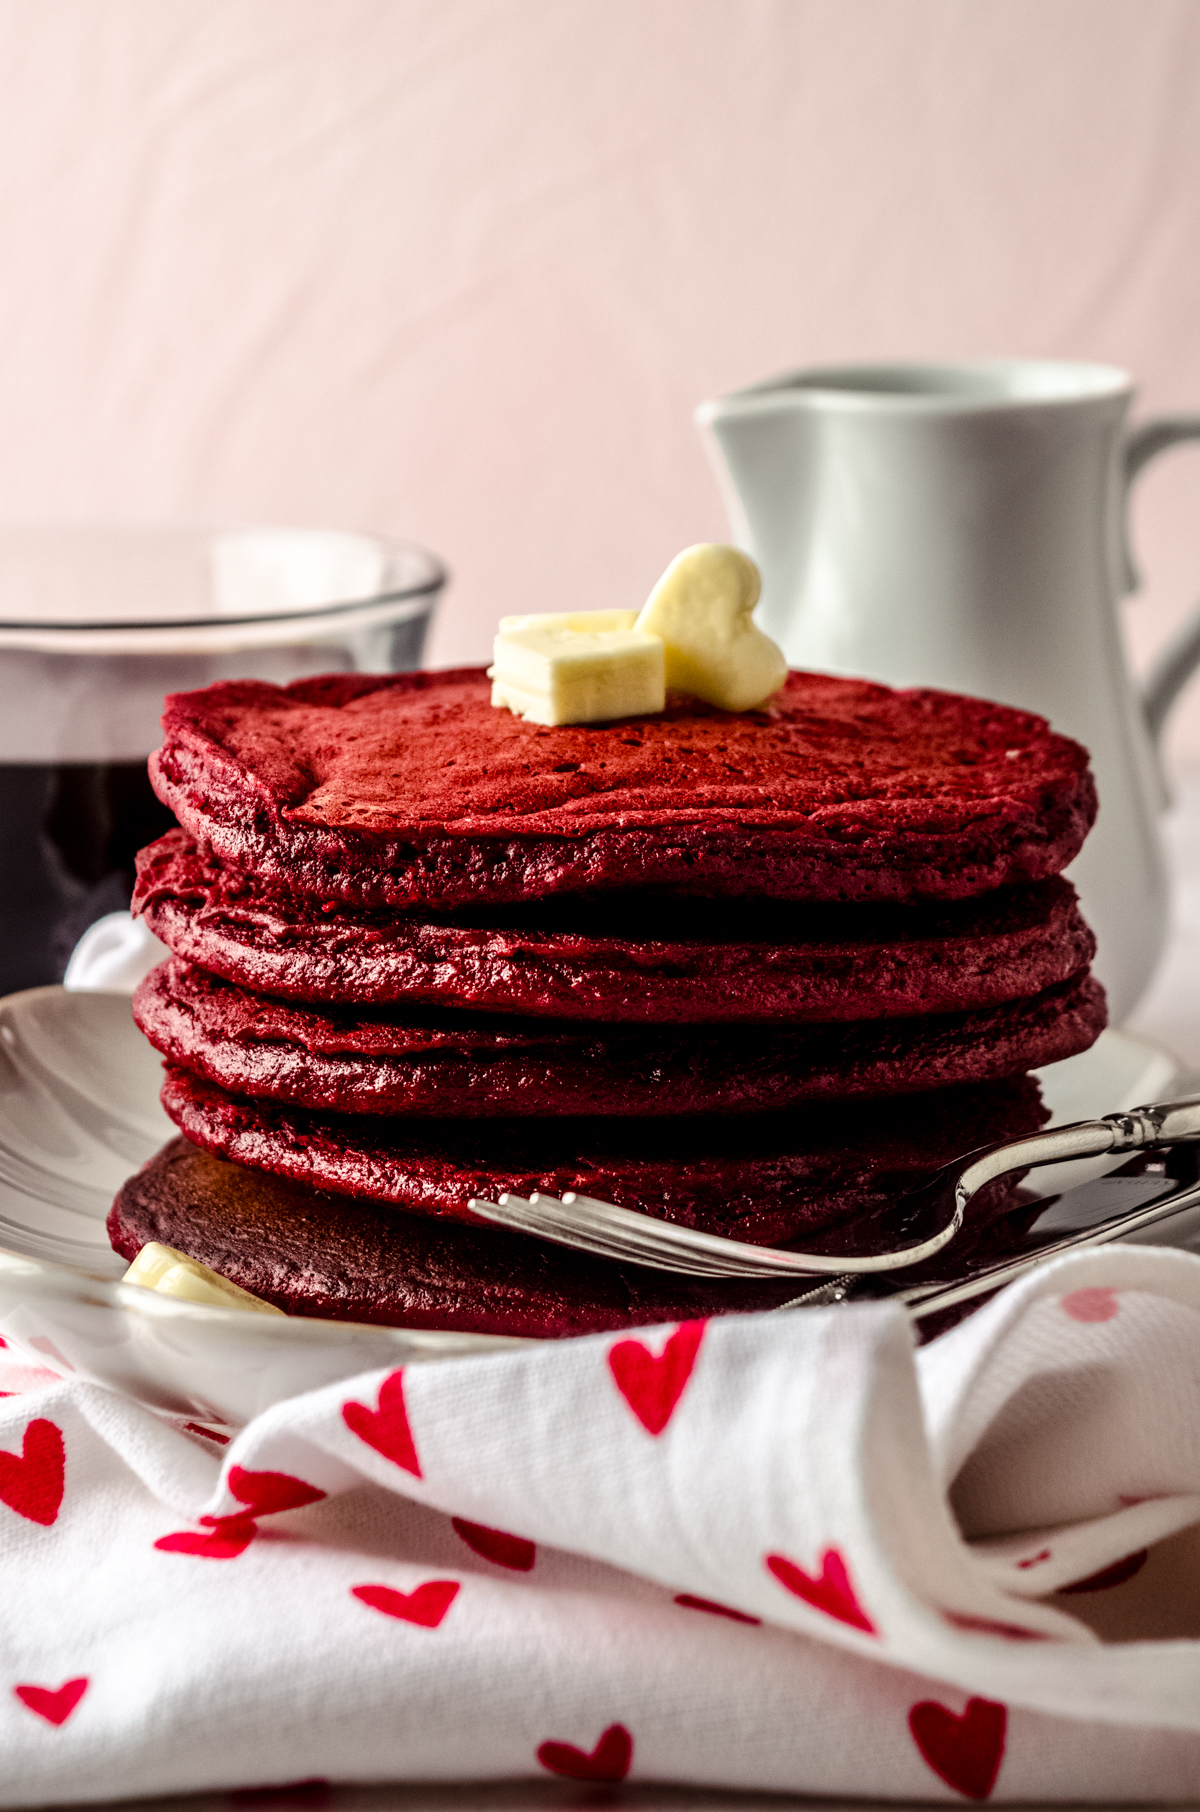 A stack of red velvet pancakes on a plate with a fork. There are mini butter hearts on top of the pancakes and a cup of coffee and syrup container in the background.